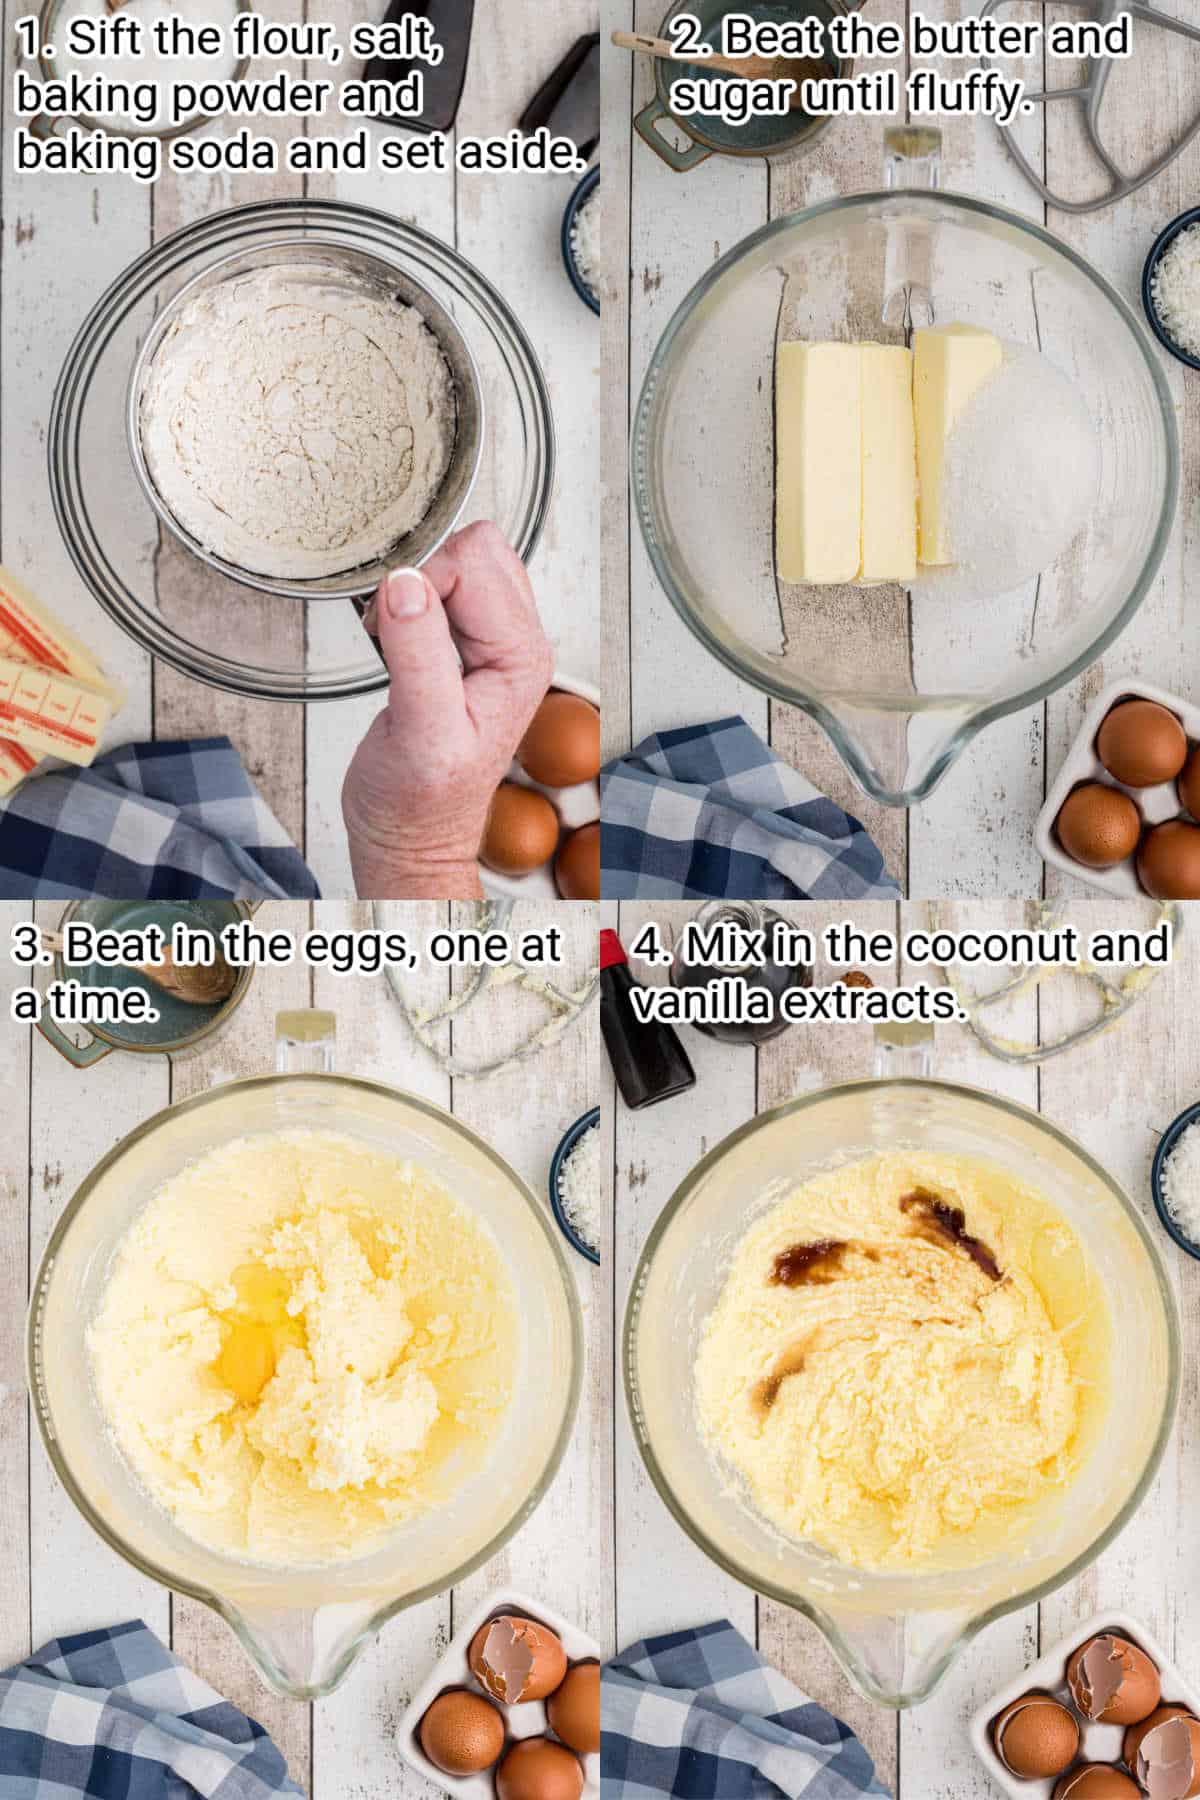 four images showing steps how to make a louisiana crunch cake